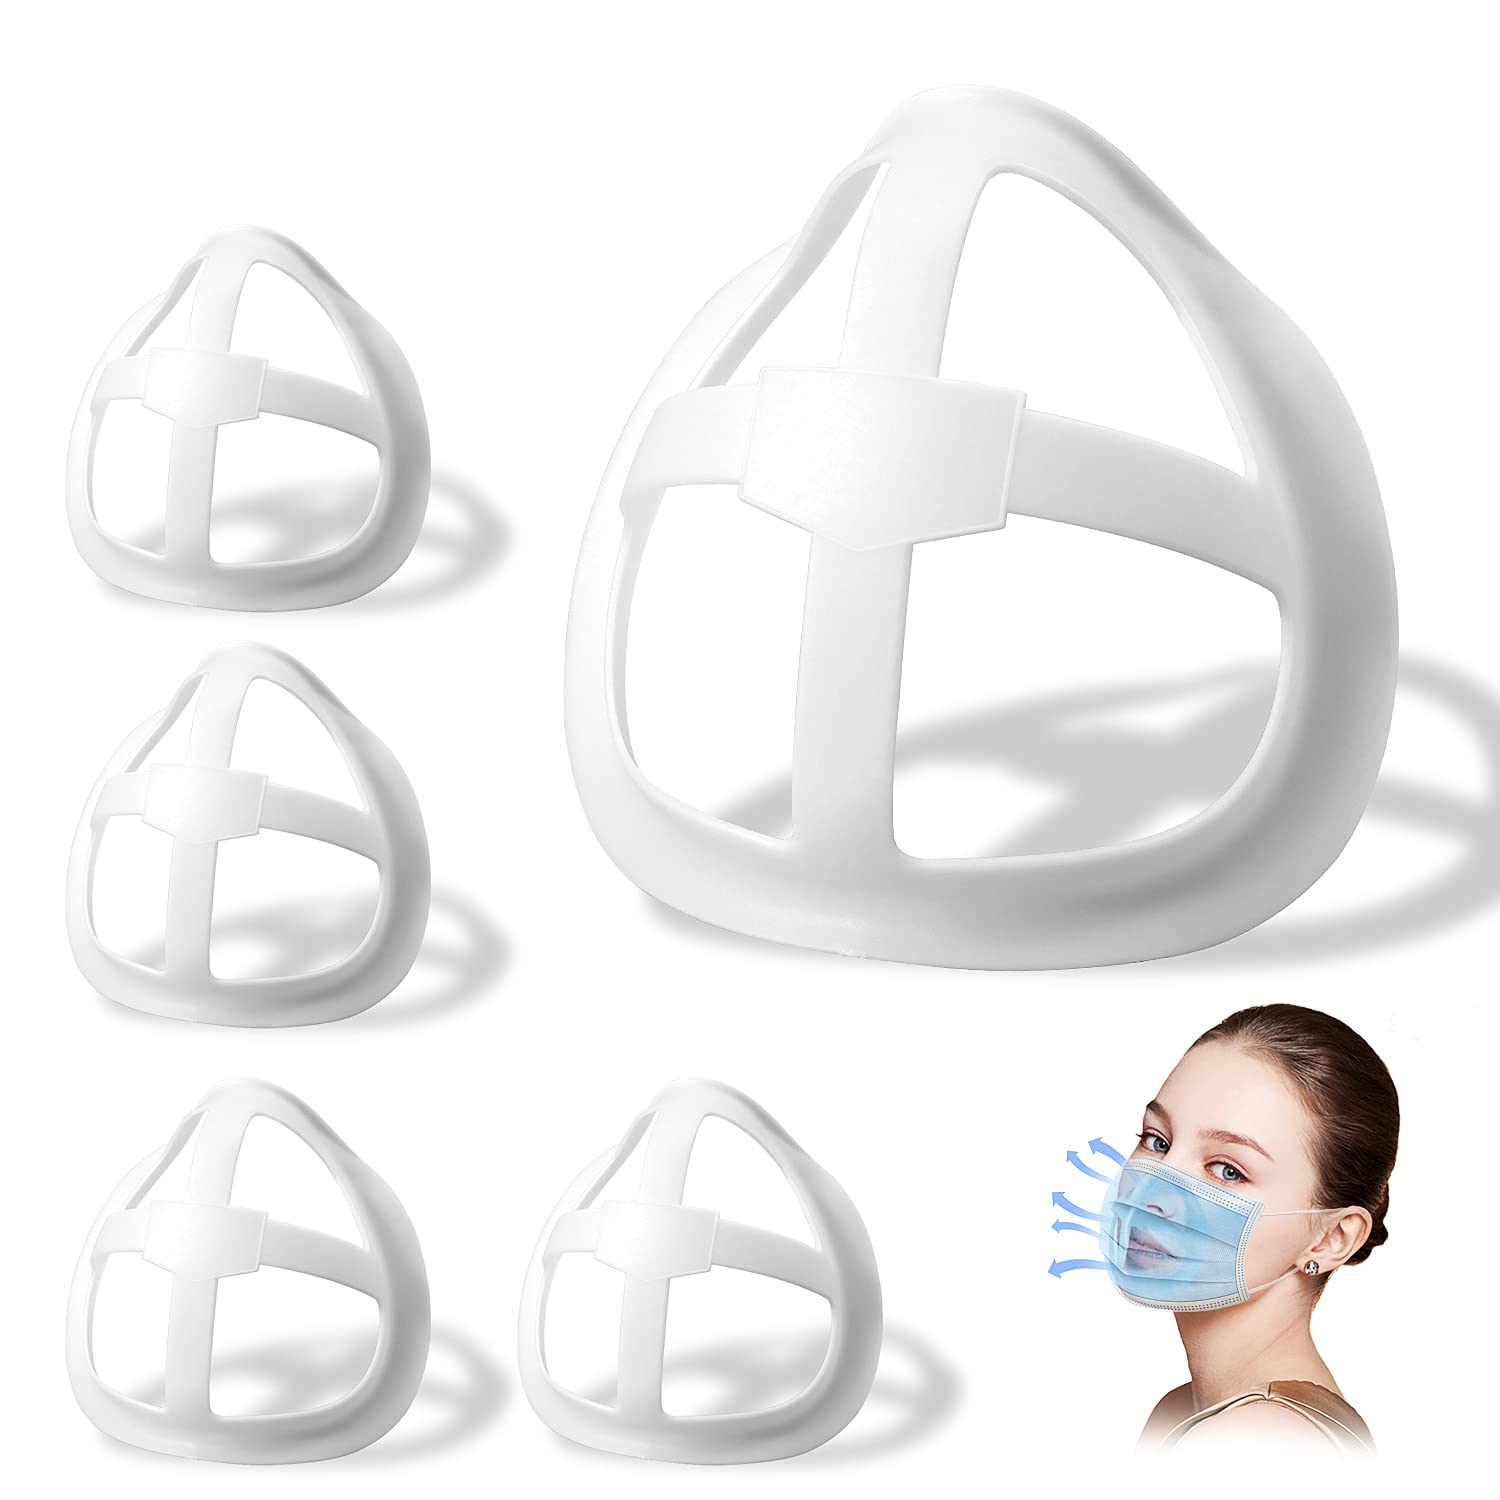 3D Face Inner Bracket for Comfortable Breathing,Face Internal Support Frame|Breathe Cup Lipstick Protector Keep Fabric off Mouth to Create More Breathing Space[Washable|Reusable|Translucent,5Pcs]